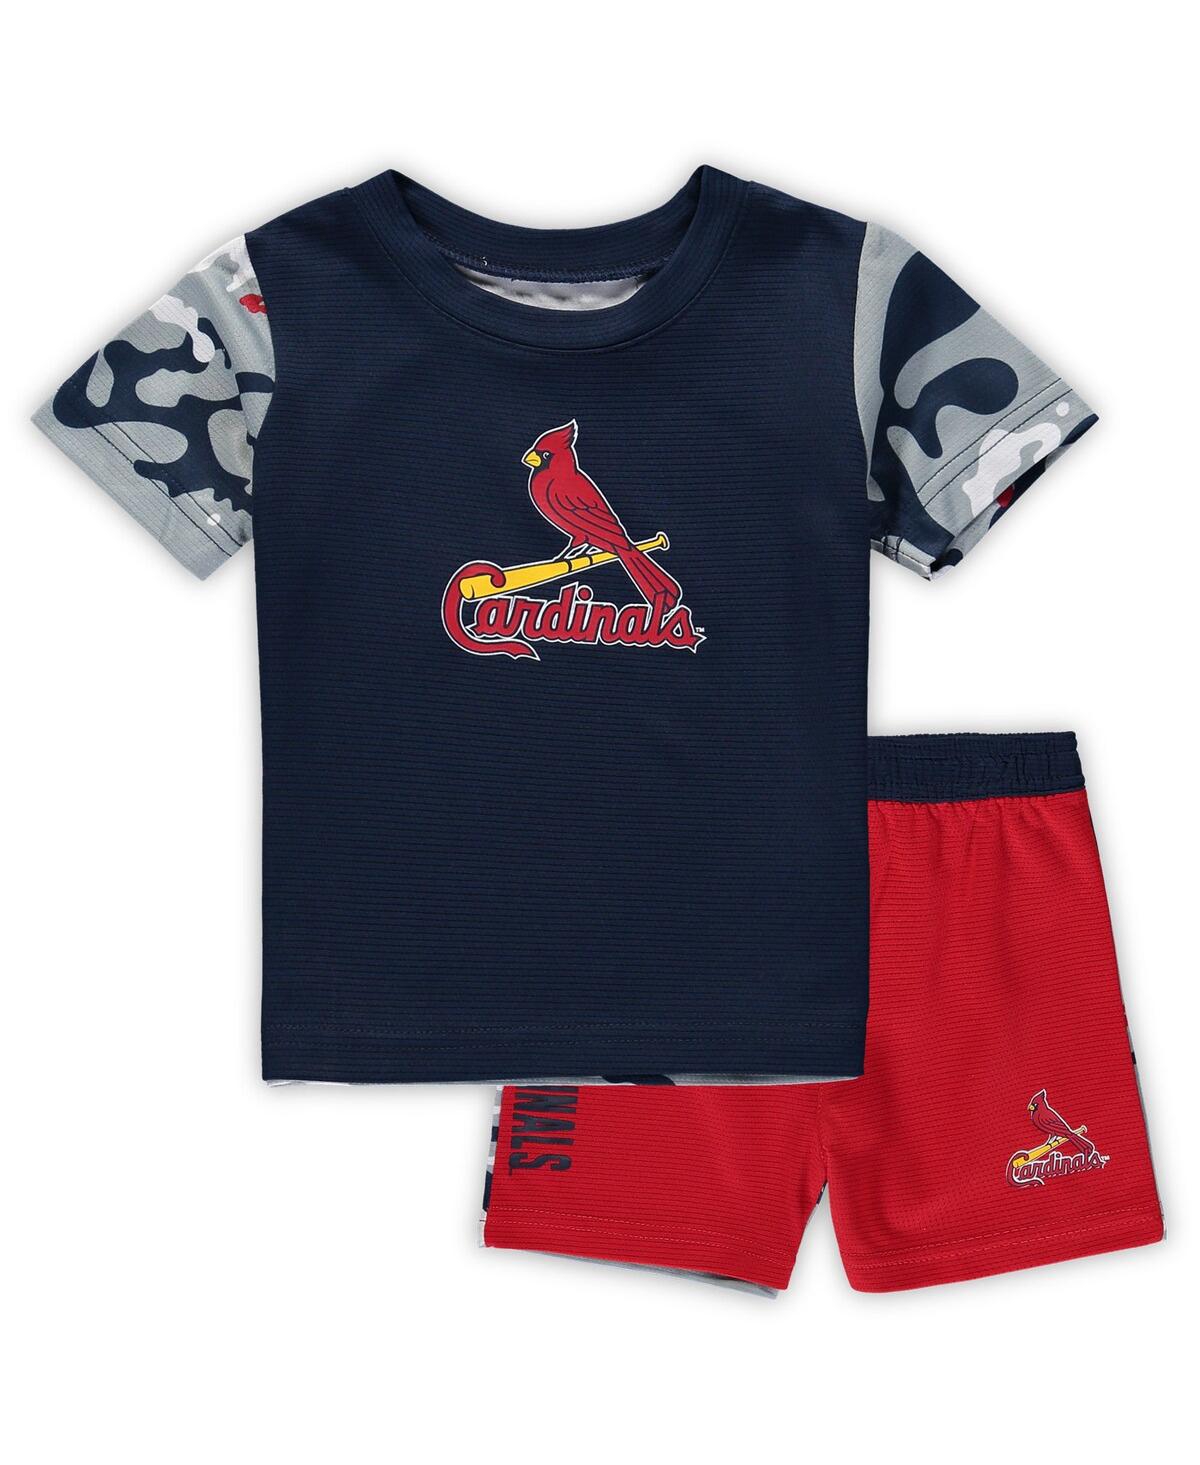 Shop Outerstuff Newborn And Infant Boys And Girls Navy, Red St. Louis Cardinals Pinch Hitter T-shirt And Shorts Set In Navy,red